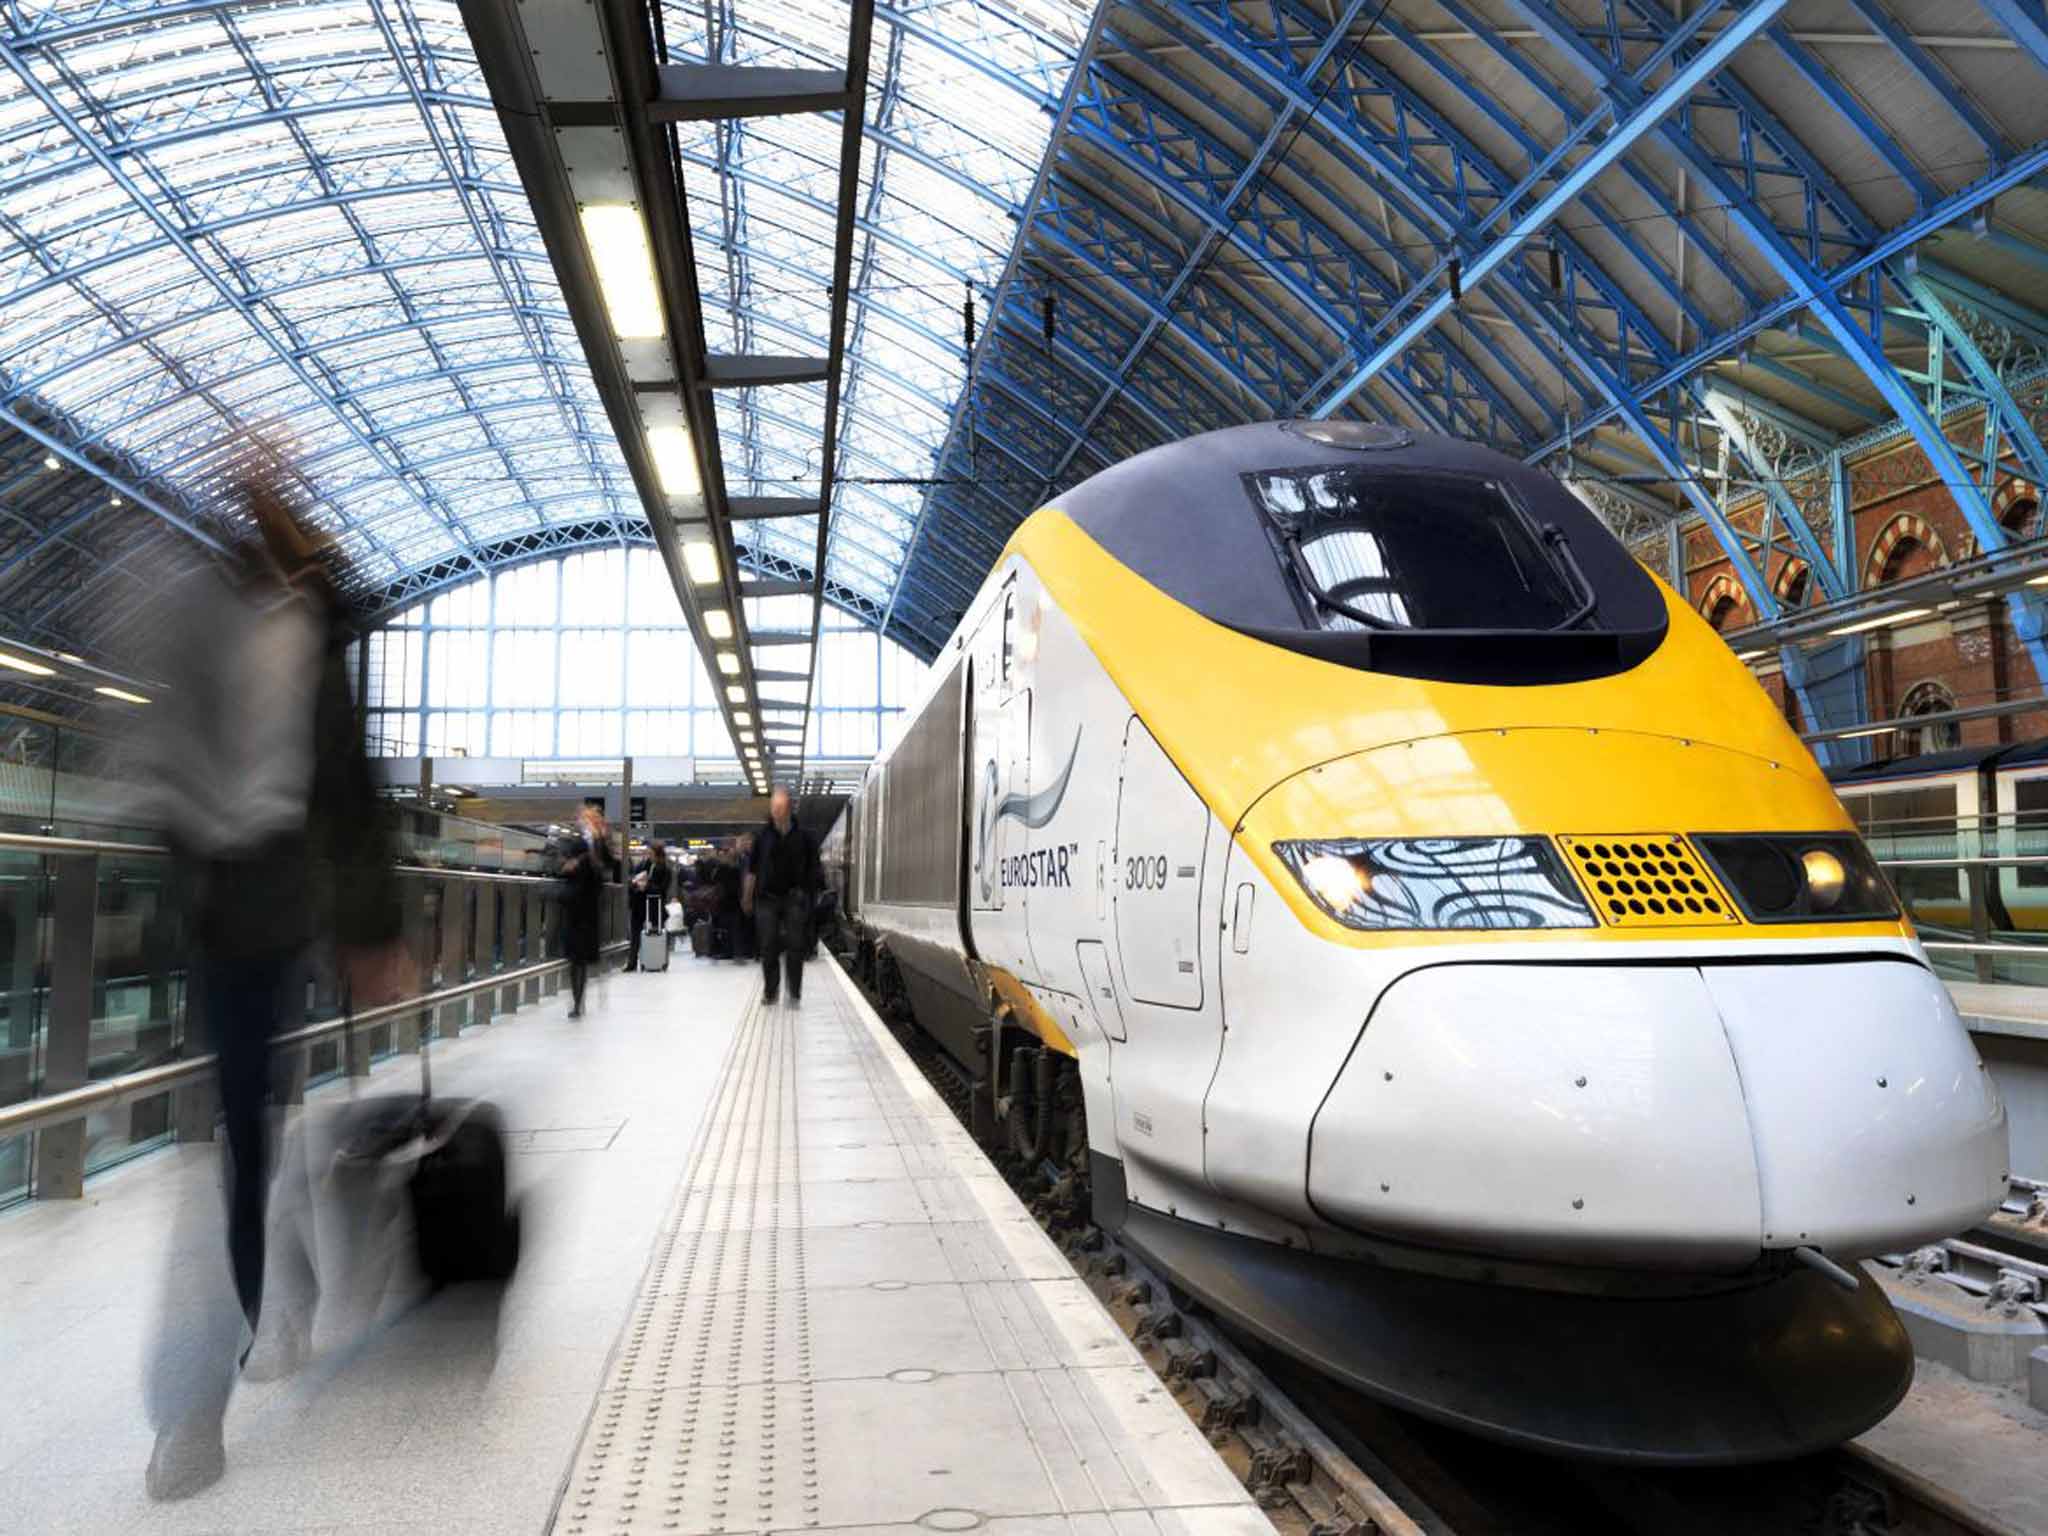 Trains and St Pancras facilities are getting a make-over by Christopher Jenner